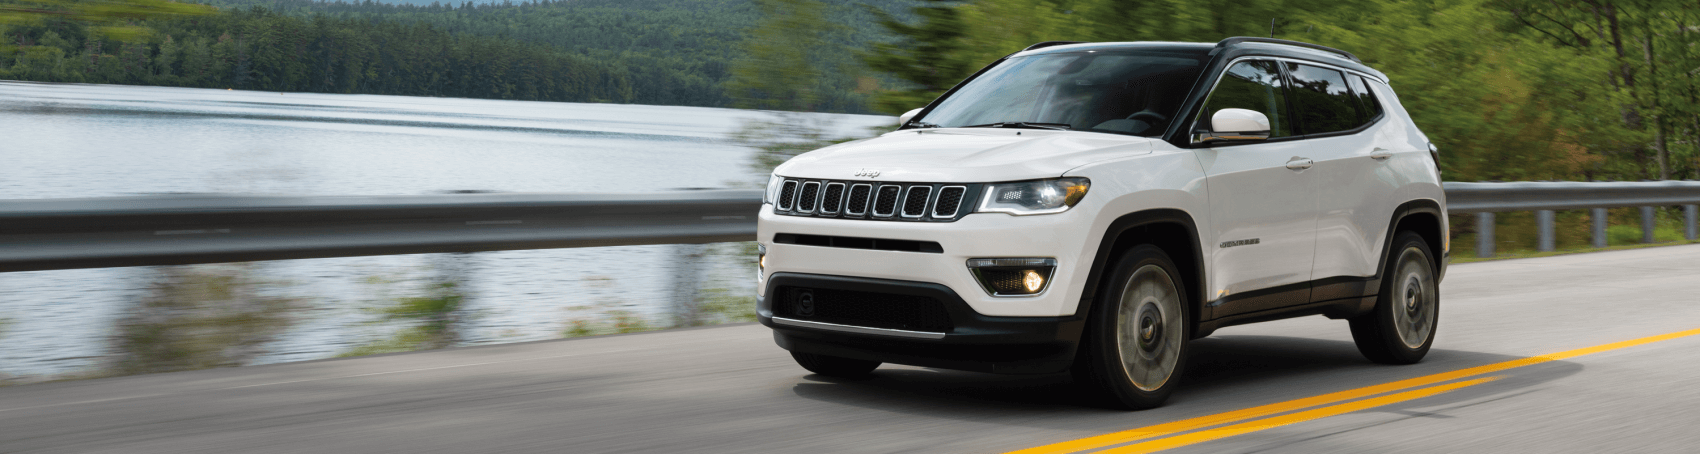 2021 Jeep Compass Limited Pearl White Mountain Road Scranton DCJR